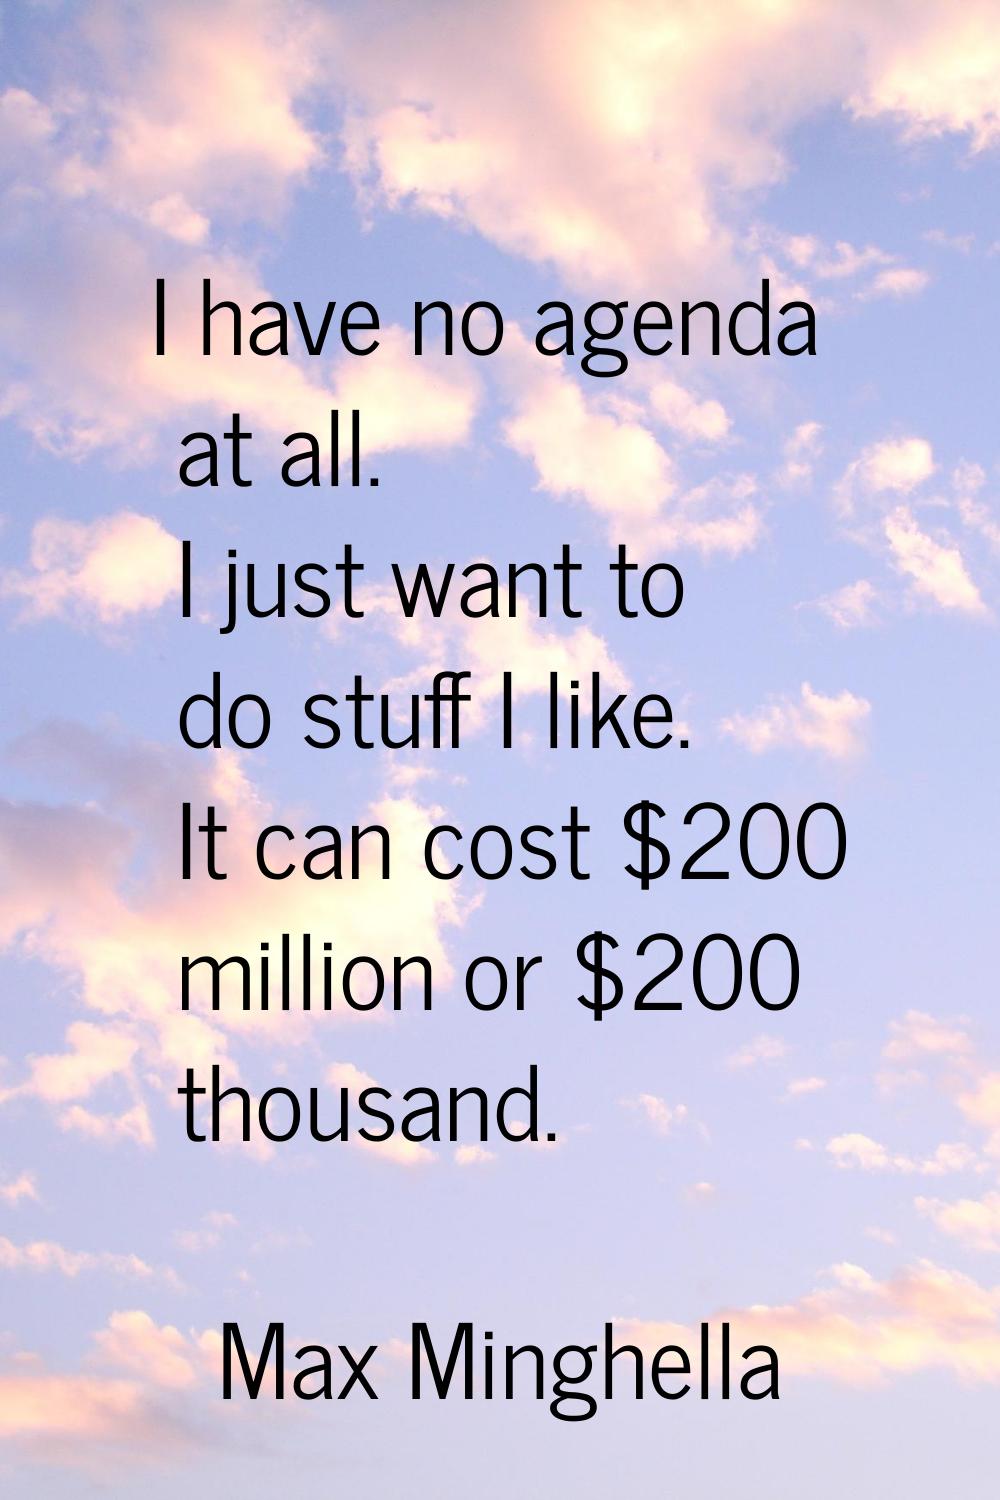 I have no agenda at all. I just want to do stuff I like. It can cost $200 million or $200 thousand.